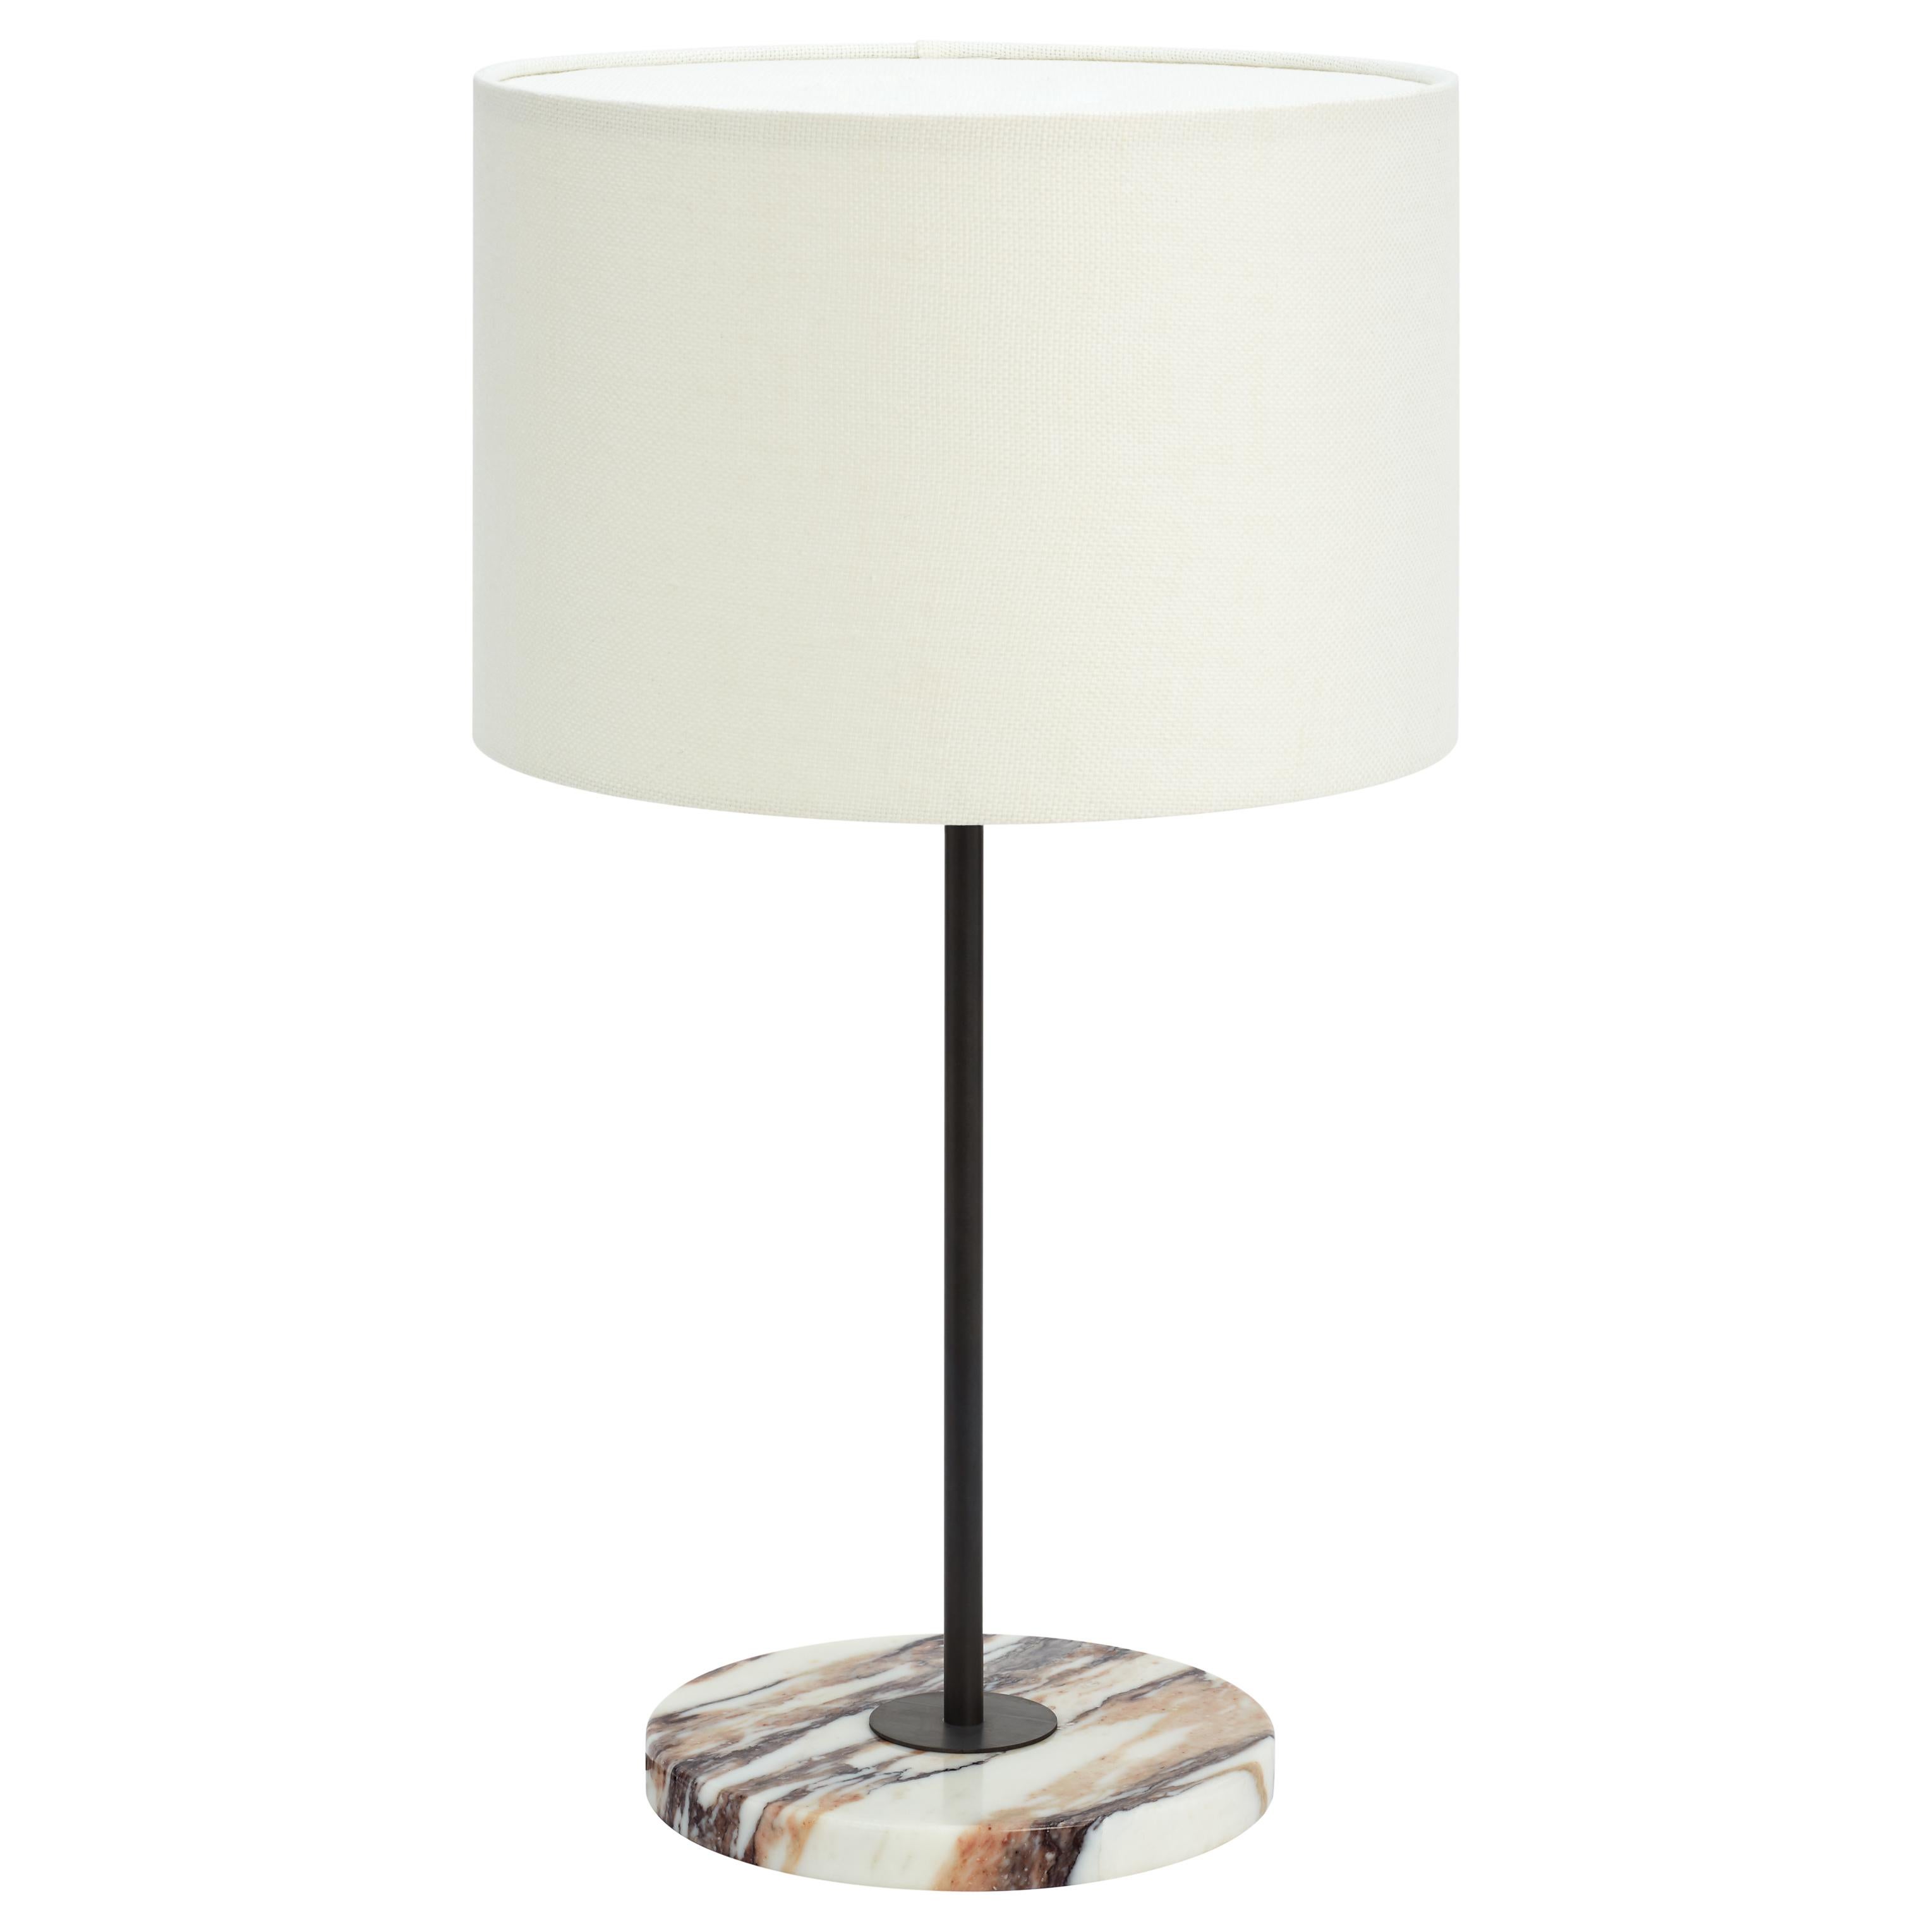 Calacatta Viola Marble Mayfair Table Lamp by CTO Lighting
Materials: Polished calacatta viola marble base with bronze and white linen shade
Dimensions: 29 x H 66 cm

All our lamps can be wired according to each country. If sold to the USA it will be